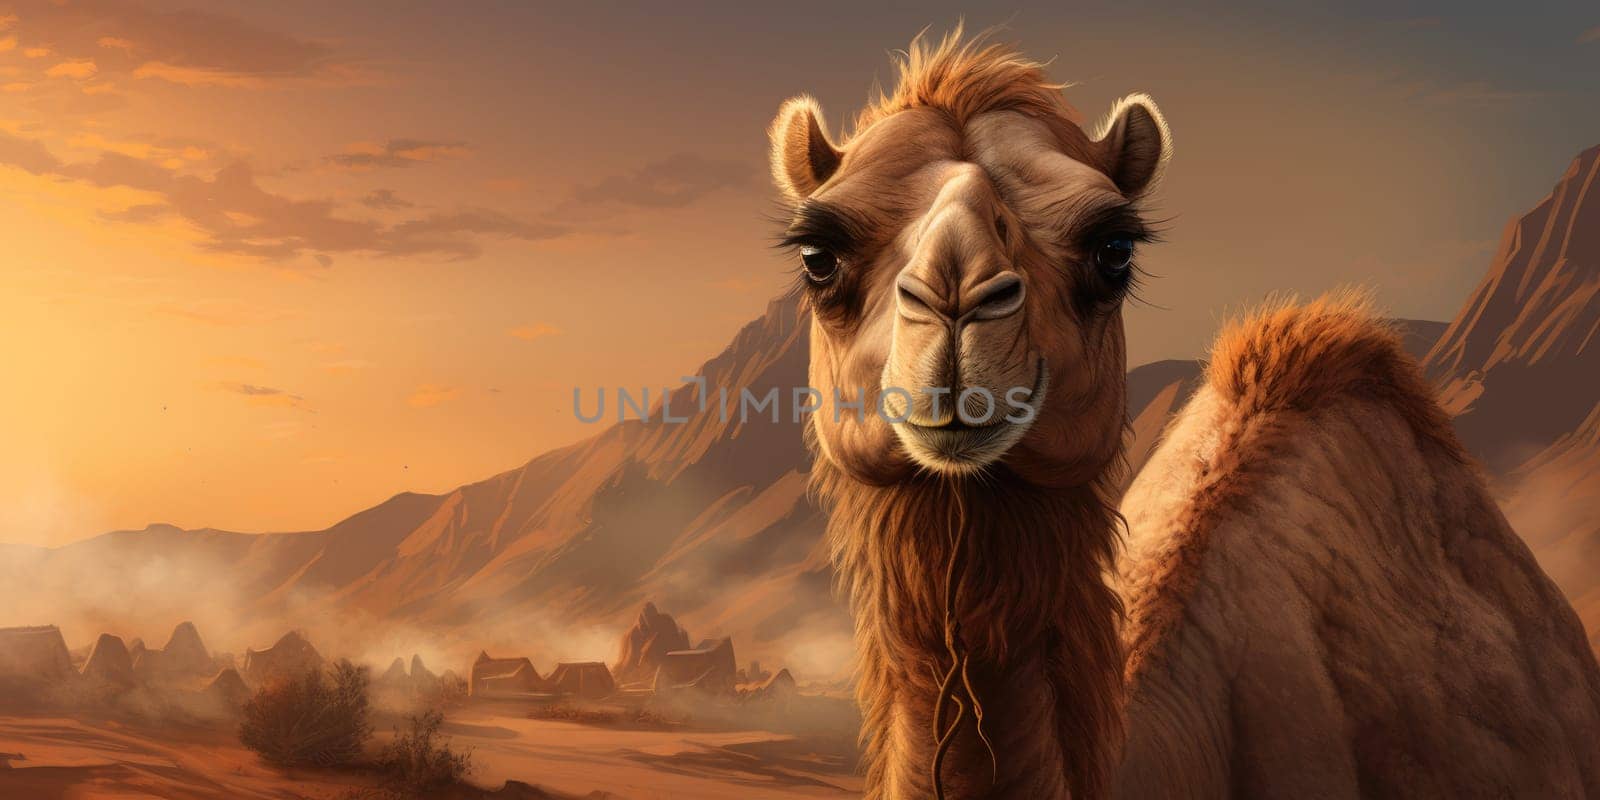 Portrait of camel in the desert or wasteland, wildlife and nature concept by Kadula